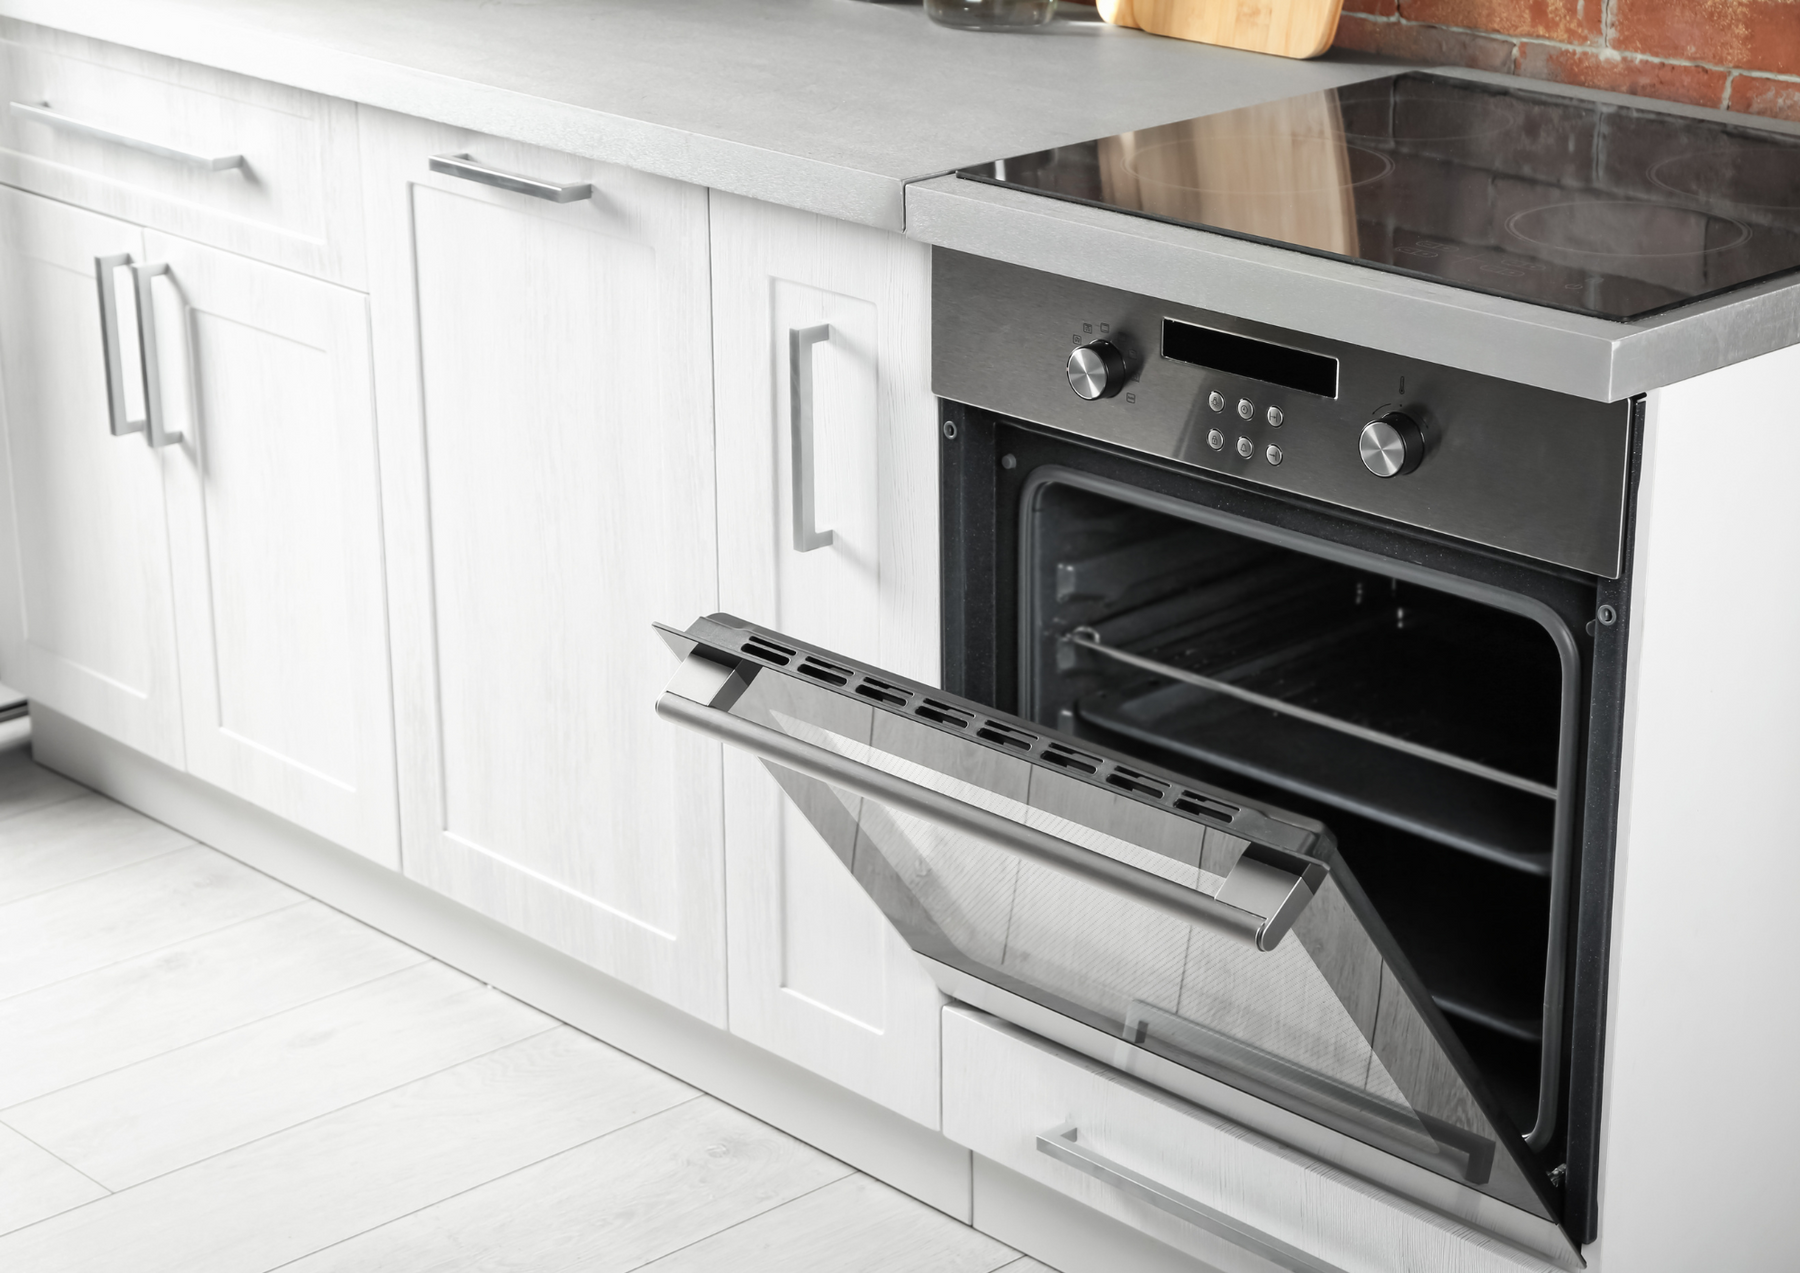 How Efficient is the Kitchen Electric Range? Assessing Energy Use and Performance